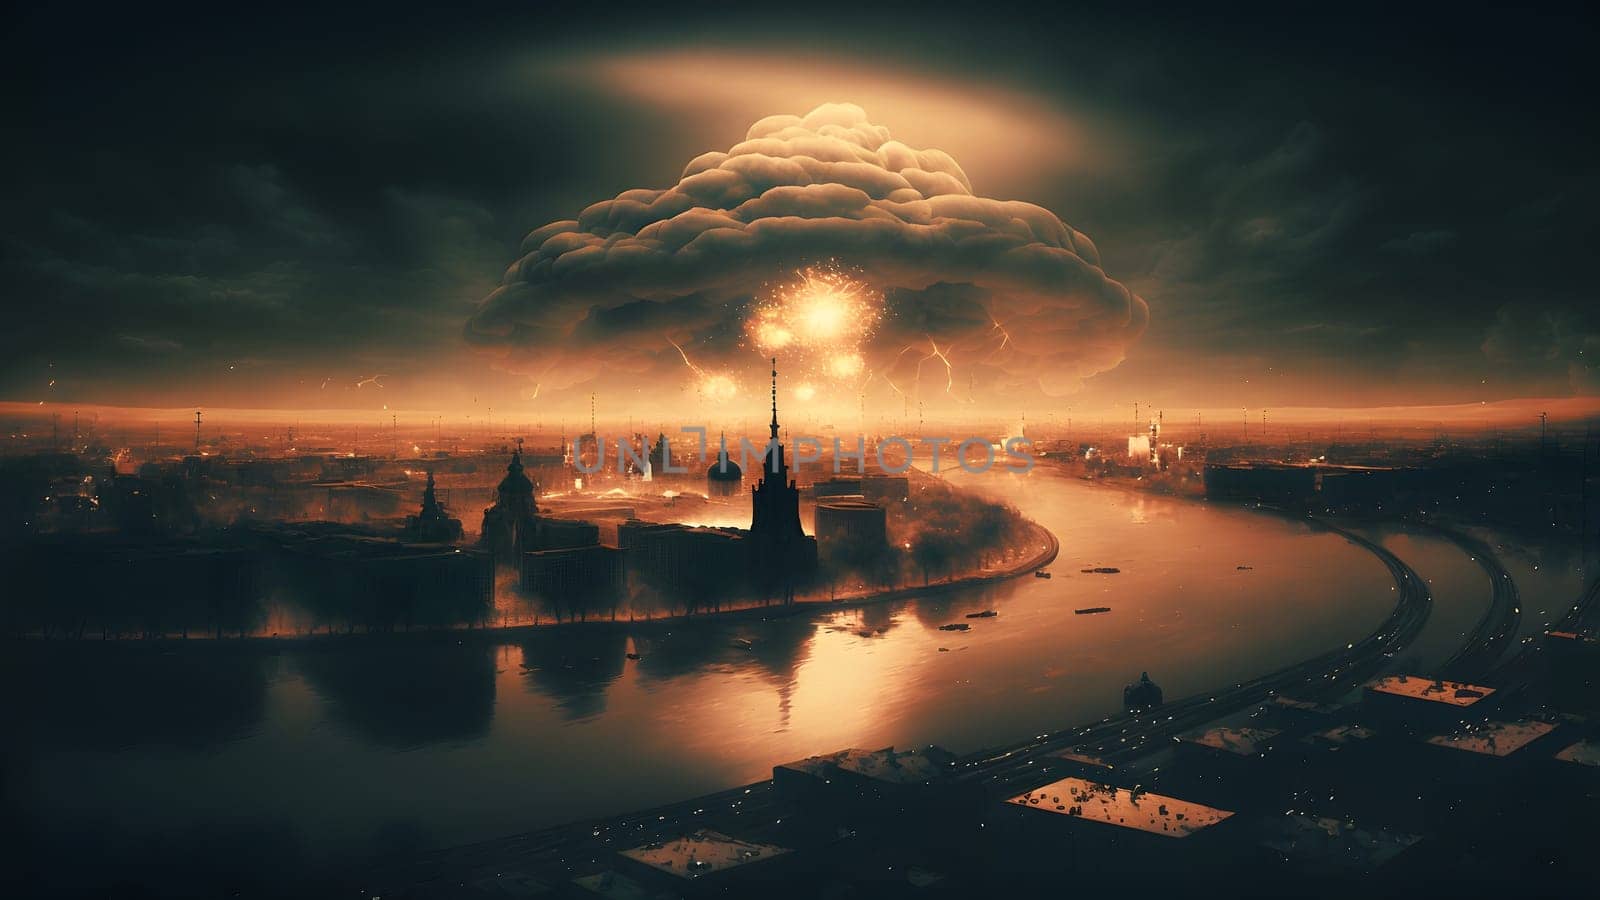 nuclear explosion mushroom cloud over russian city at morning, neural network generated art. Digitally generated image. Not based on any actual person, scene or pattern.